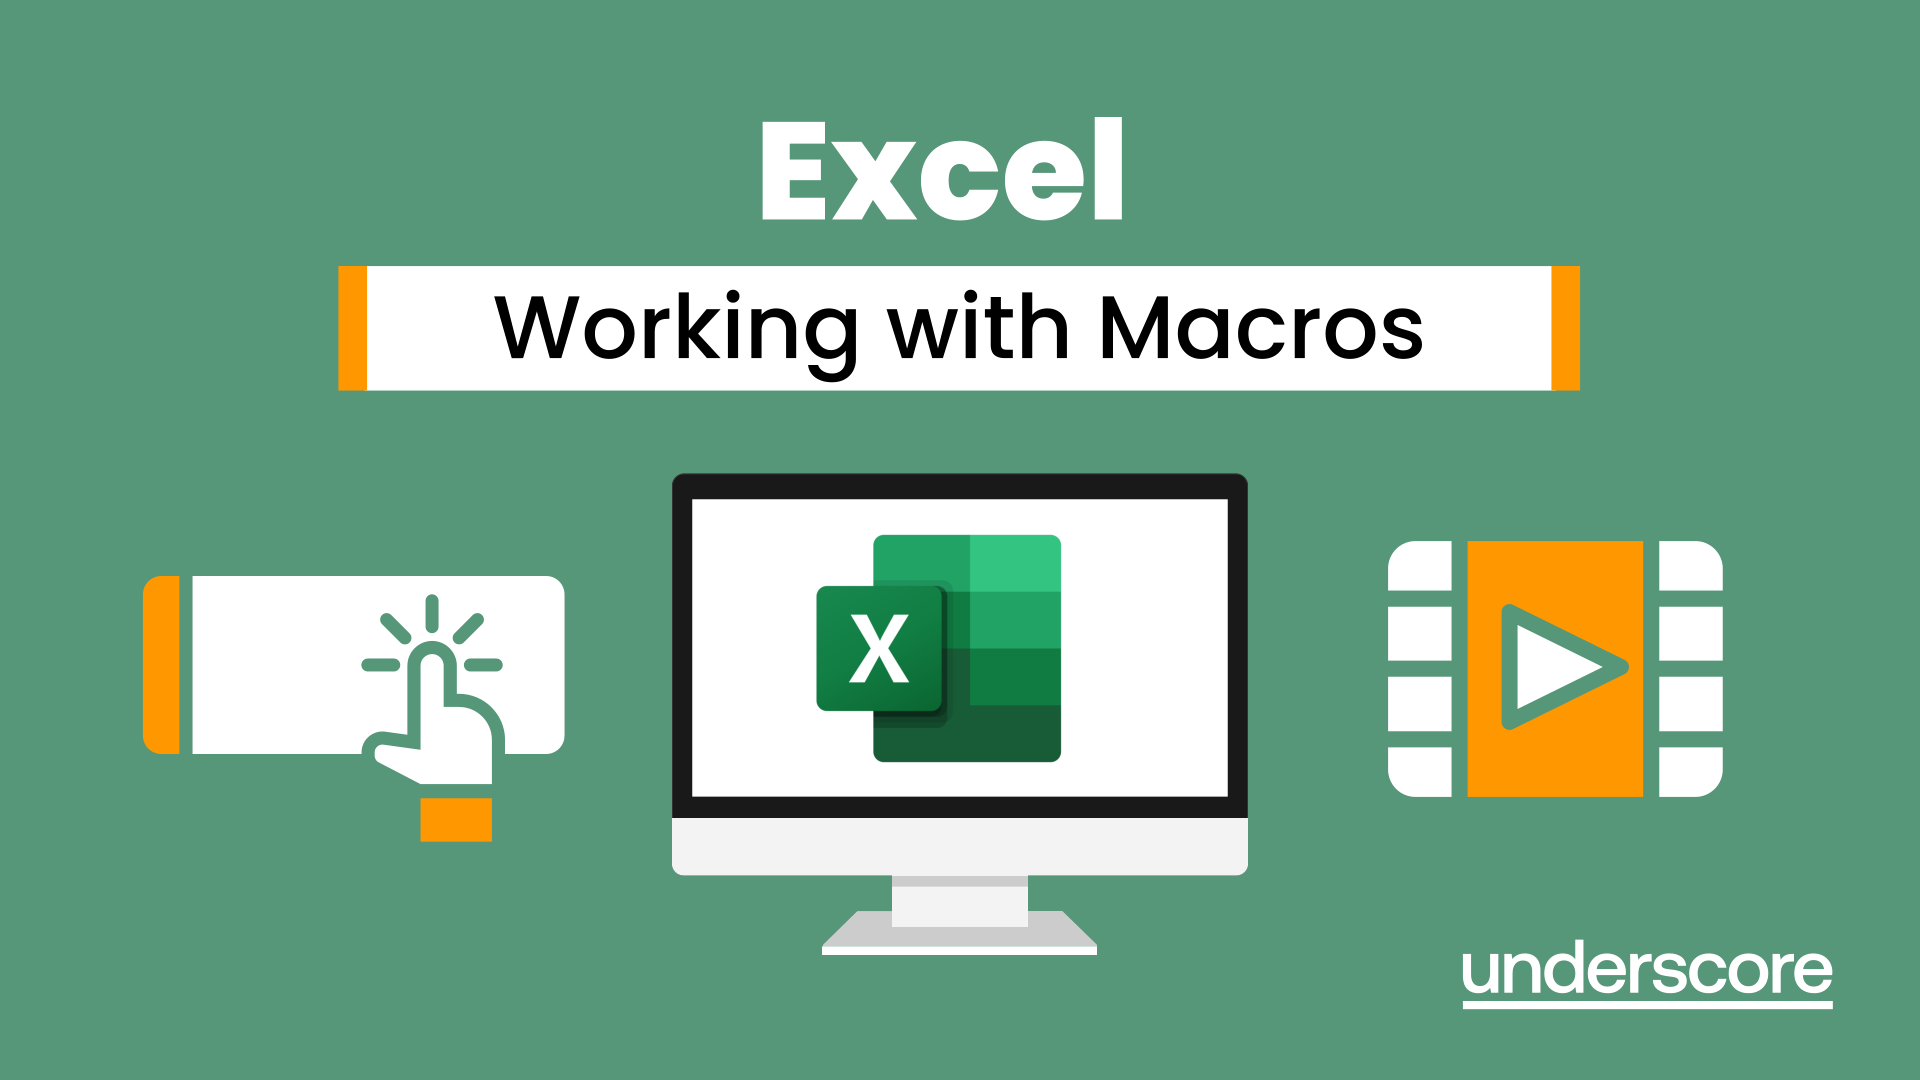 Excel Working with Macros